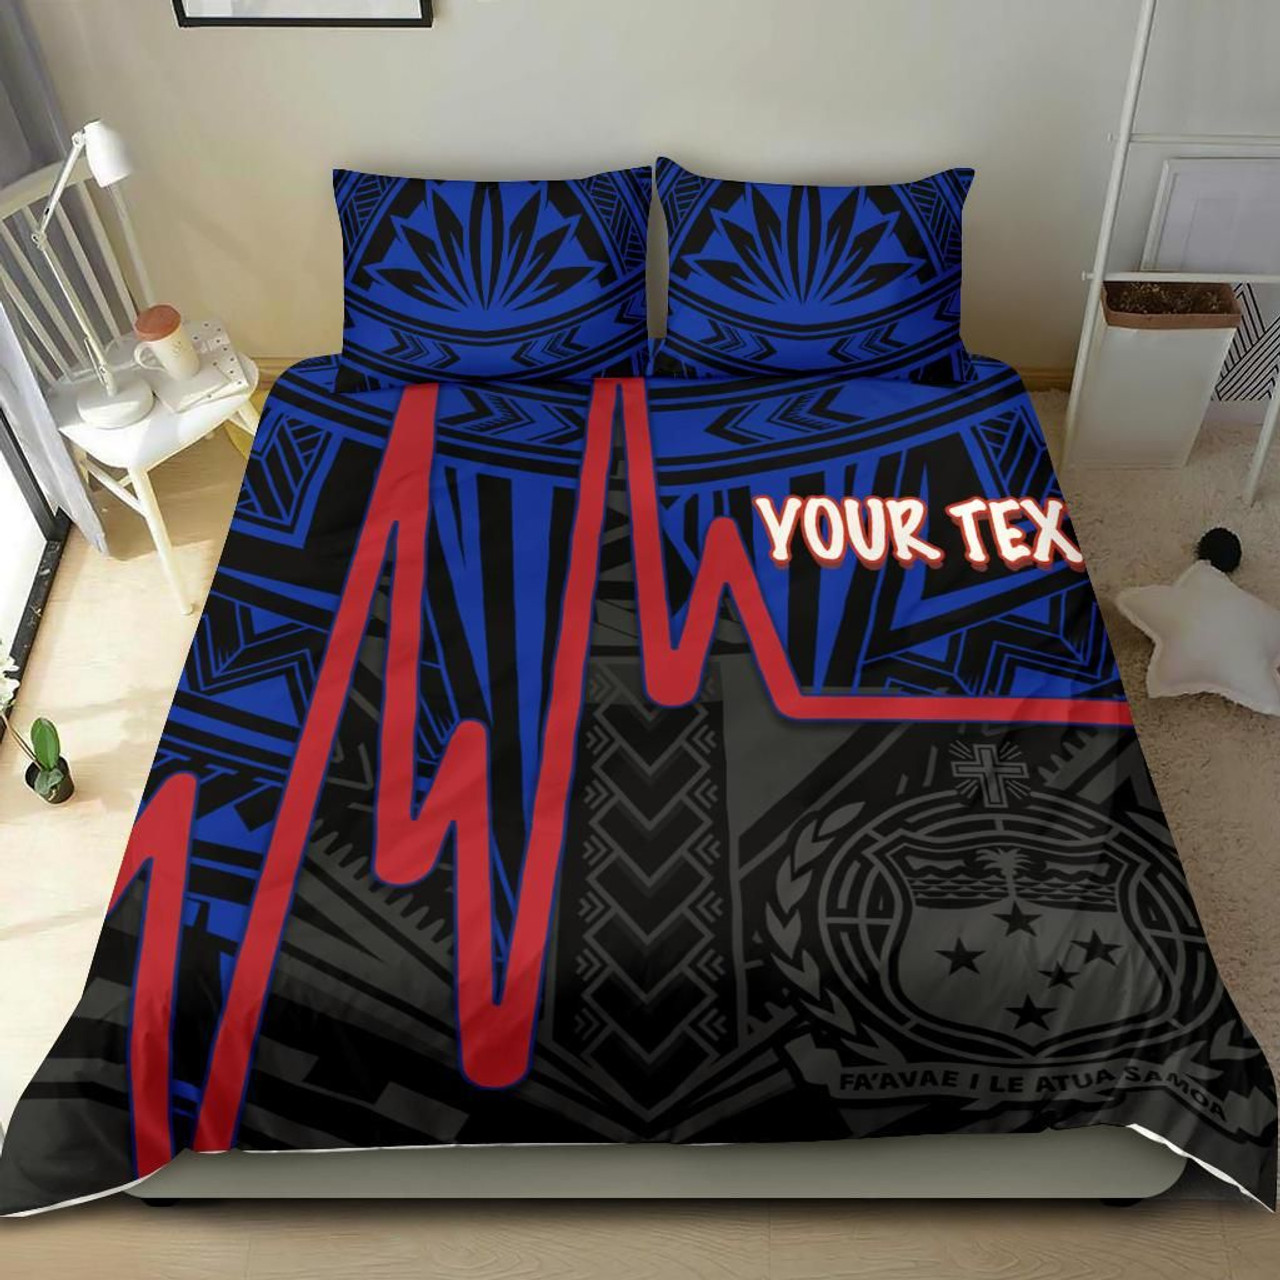 Samoa Personalised Bedding Set - Samoa Seal With Polynesian Patterns In Heartbeat Style (Blue) 2